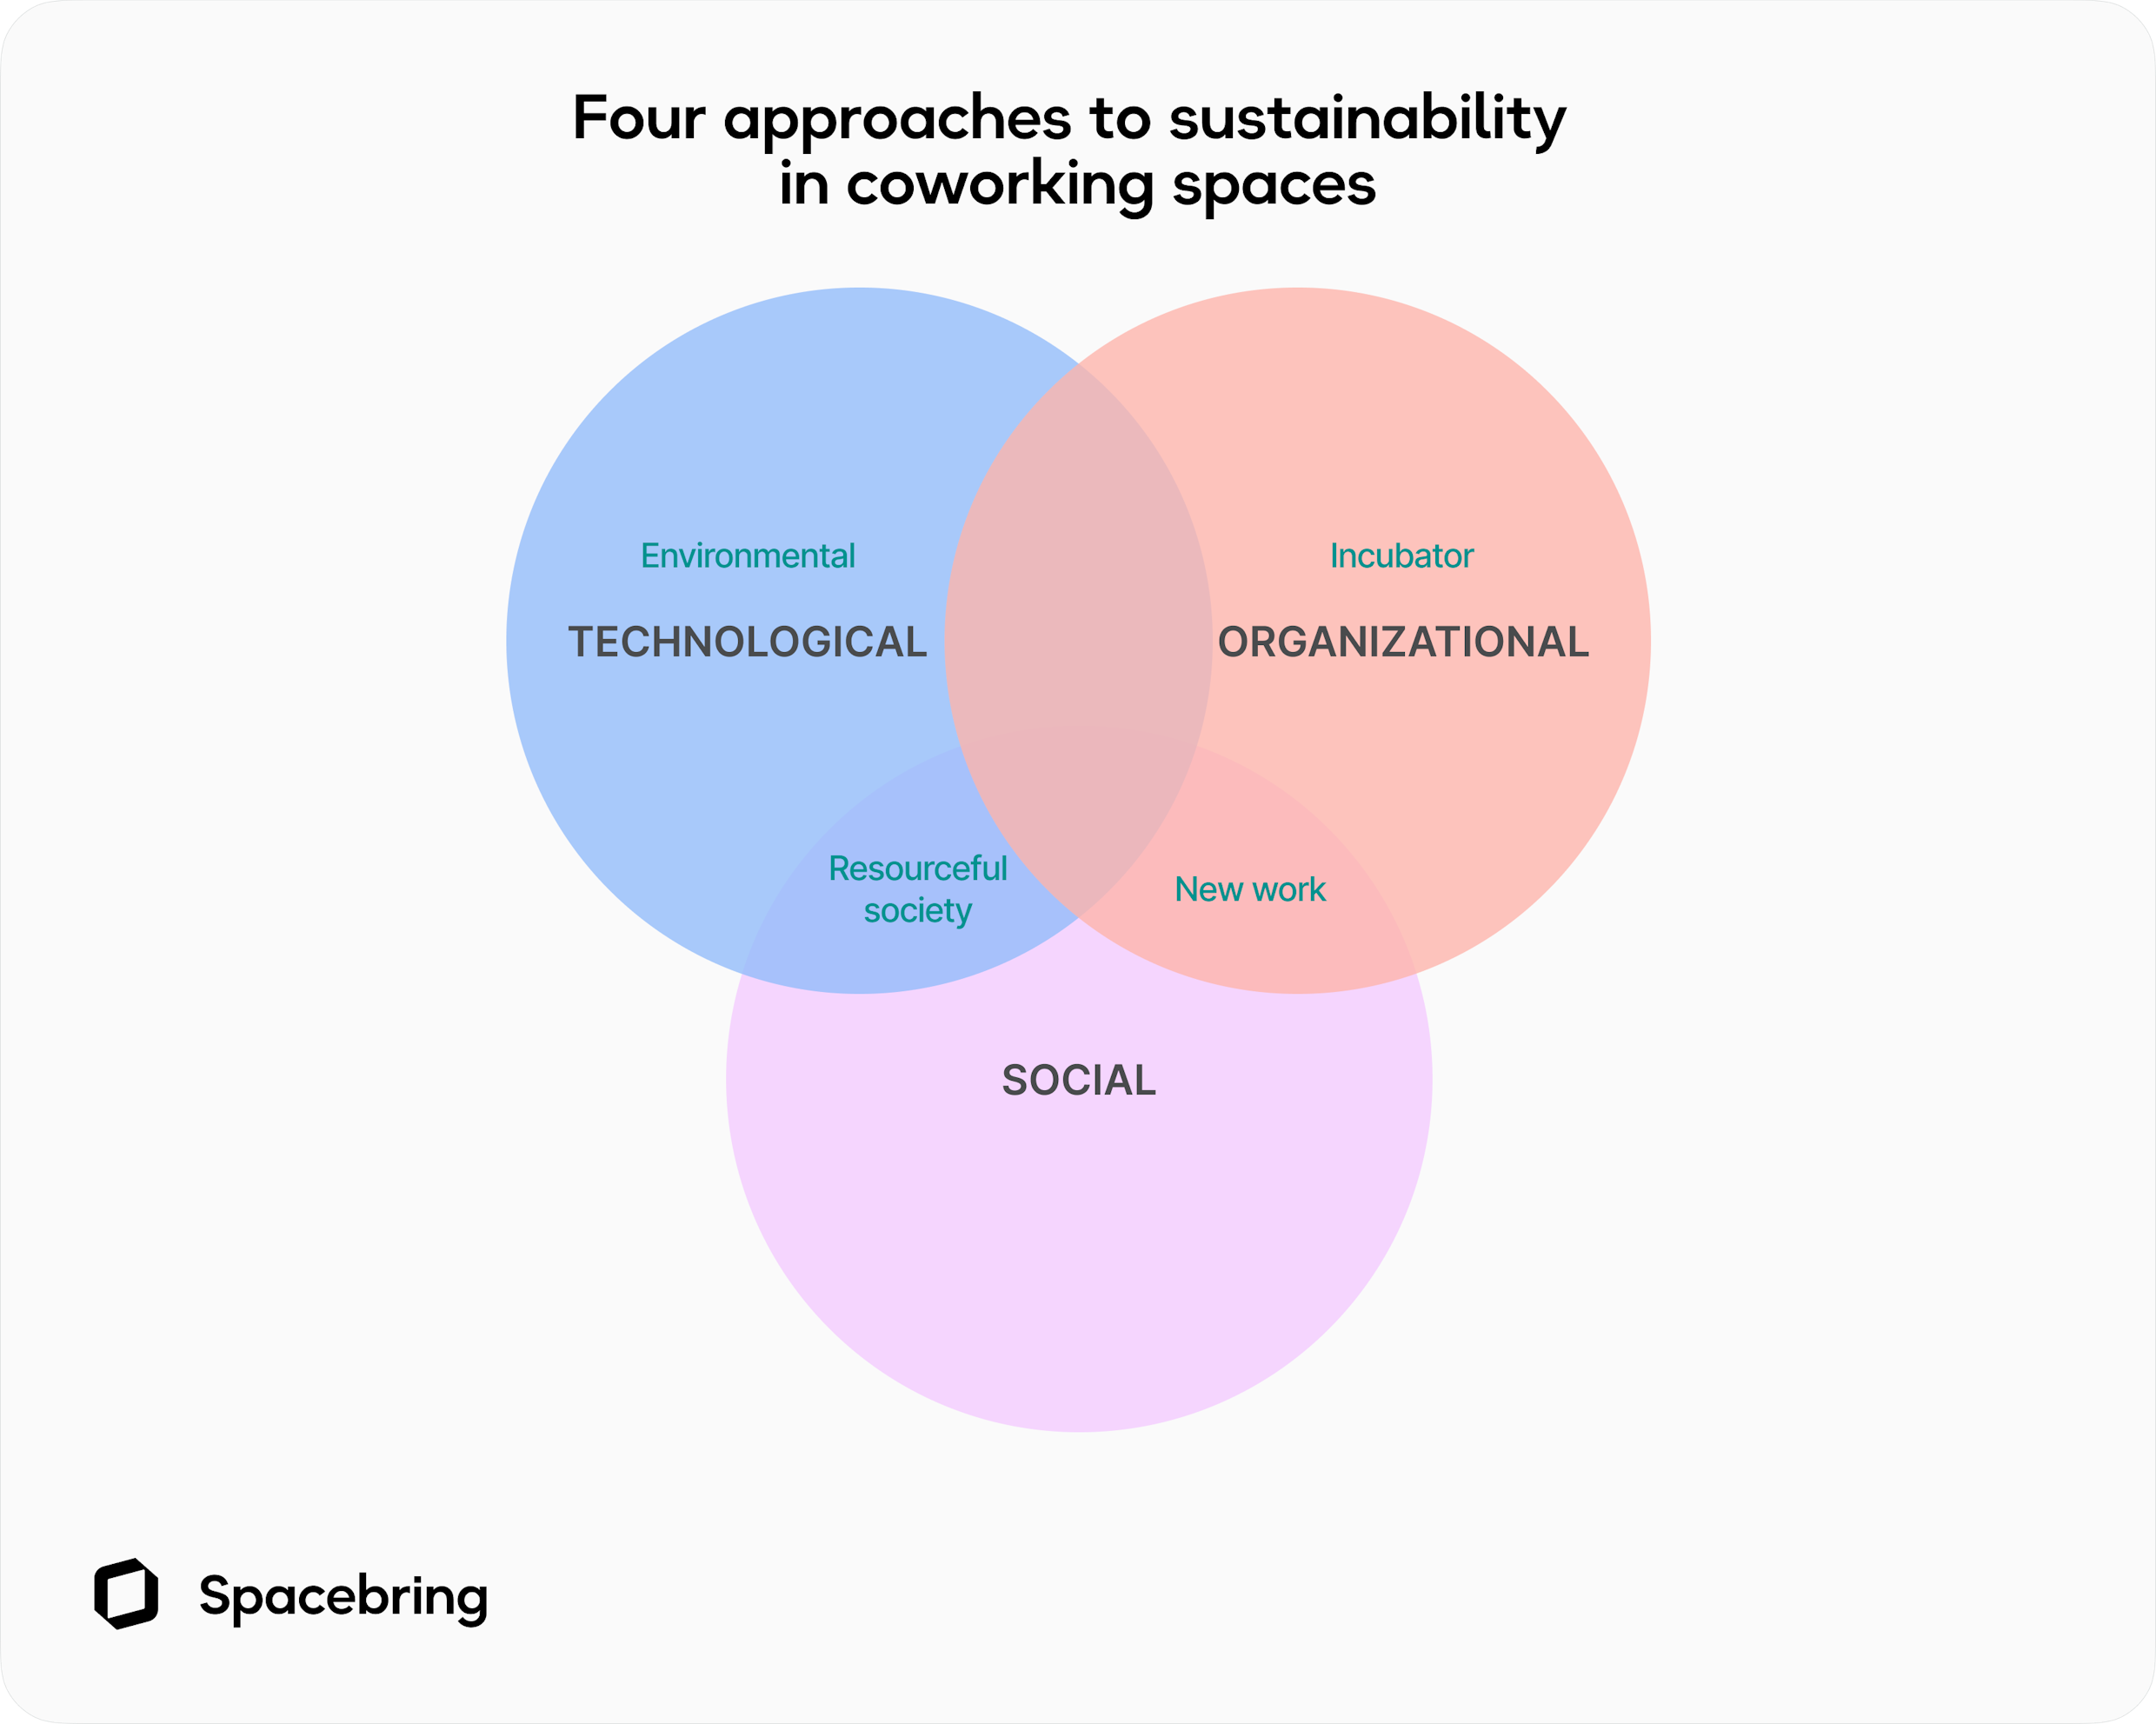 Approaches to sustainability at a coworking space